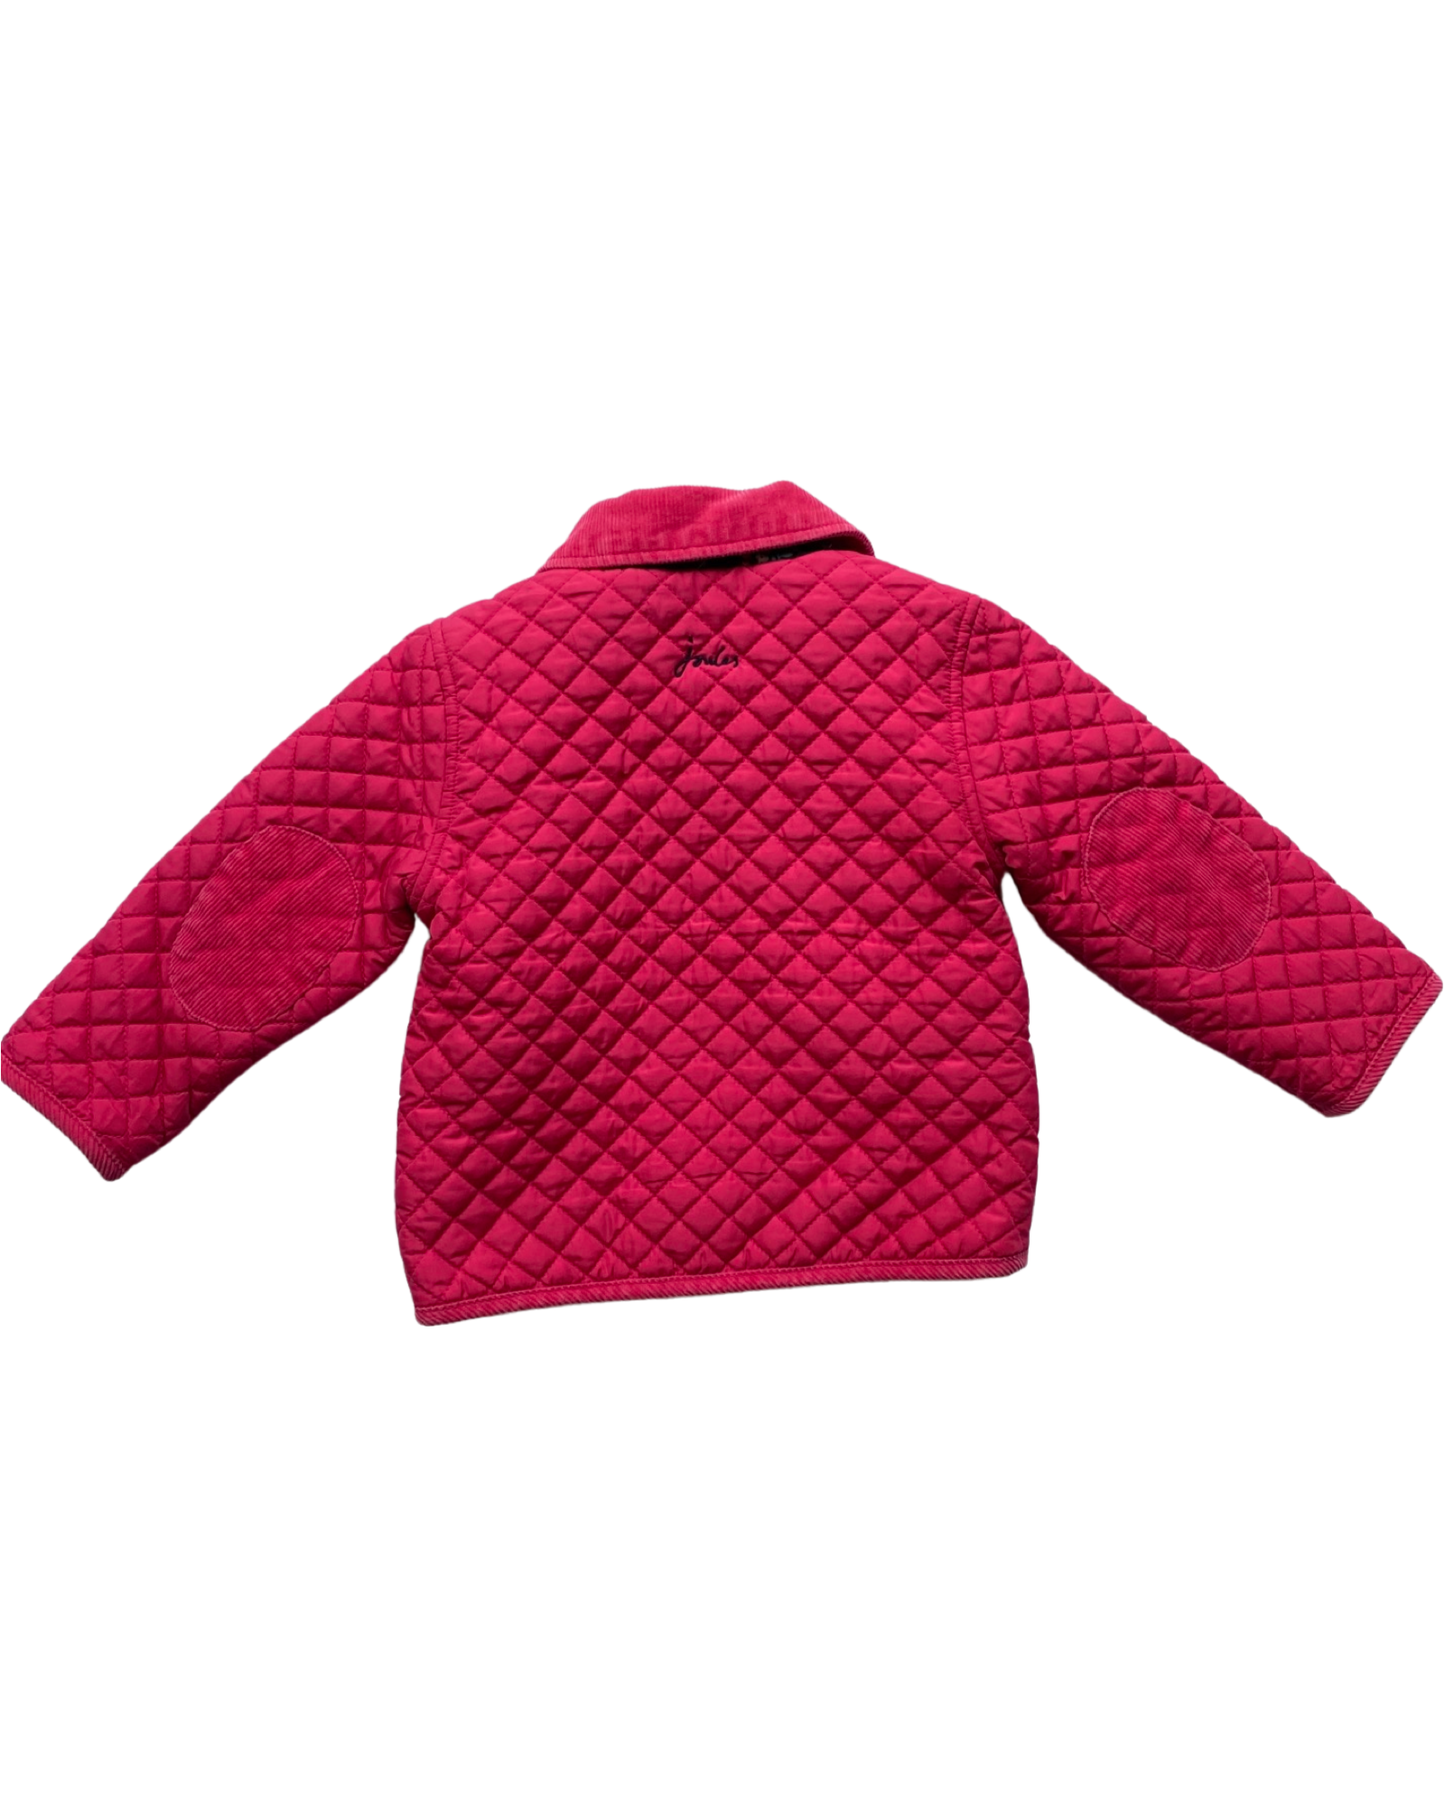 Joules pink quilted baby jacket (12-18mths)